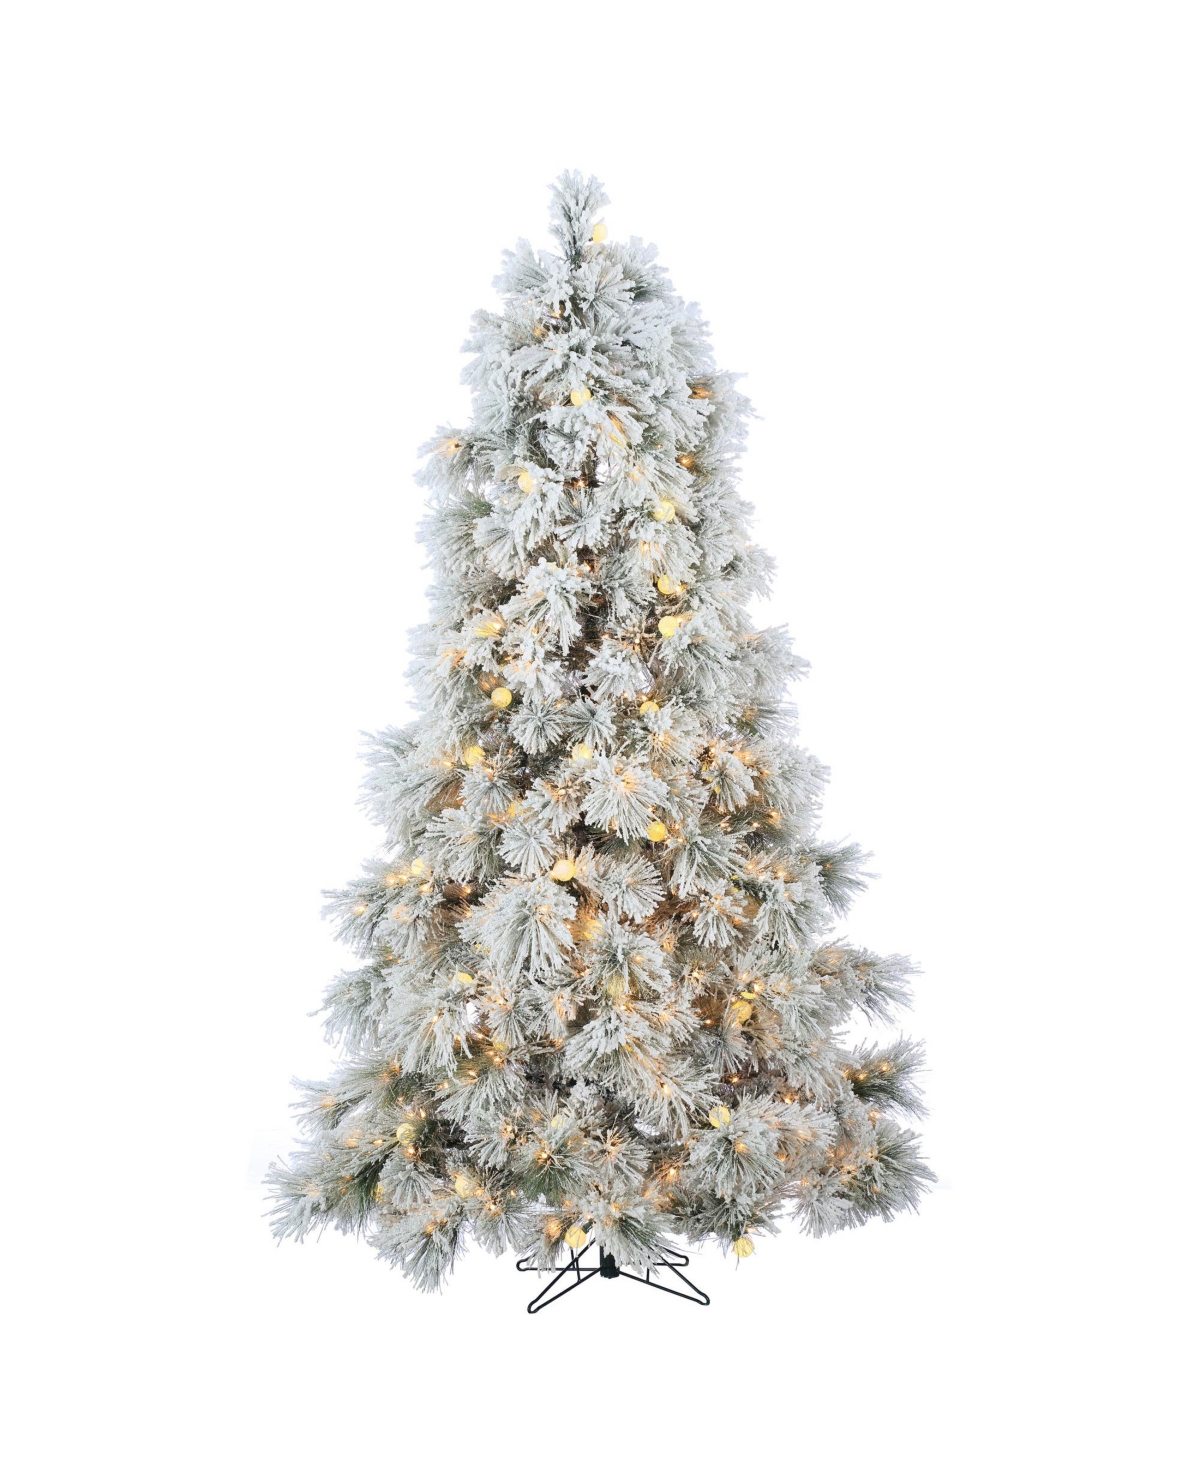 7.5Ft. Heavily Flocked Northern Pine with 750 Clear Lights and 85 G40 Warm White Led Lights - Green